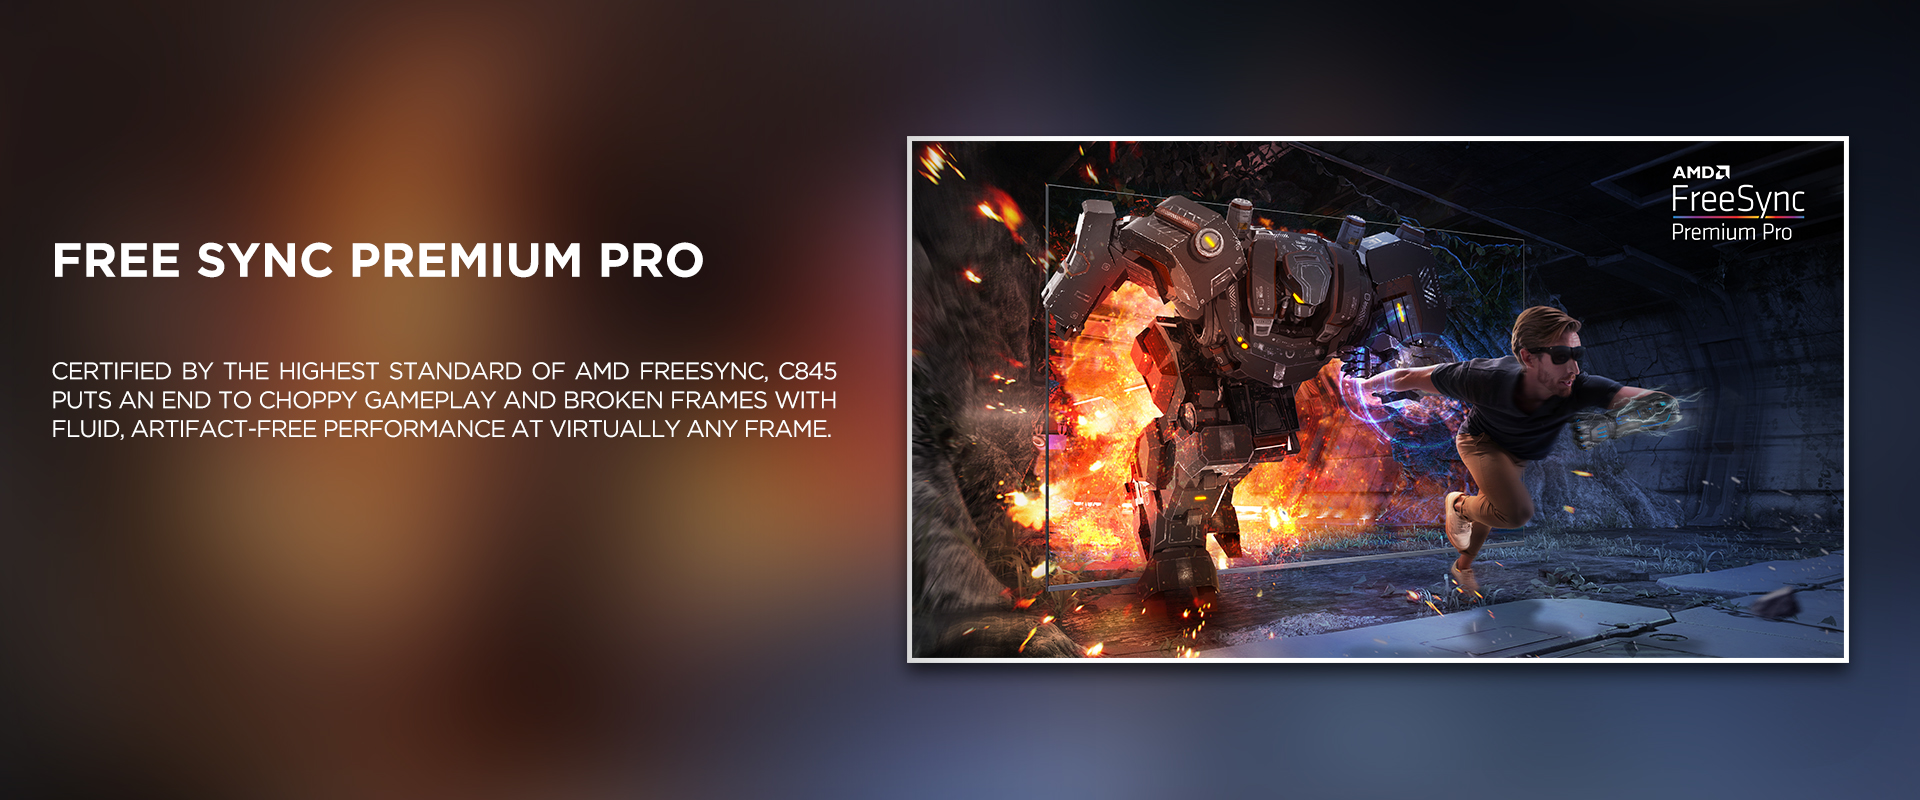 FREE SYNC PREMIUM PRO - Certified by the highest standard of AMD FreeSync, C845 puts an end to choppy gameplay and broken frames with fluid, artifact-free performance at virtually any frame.